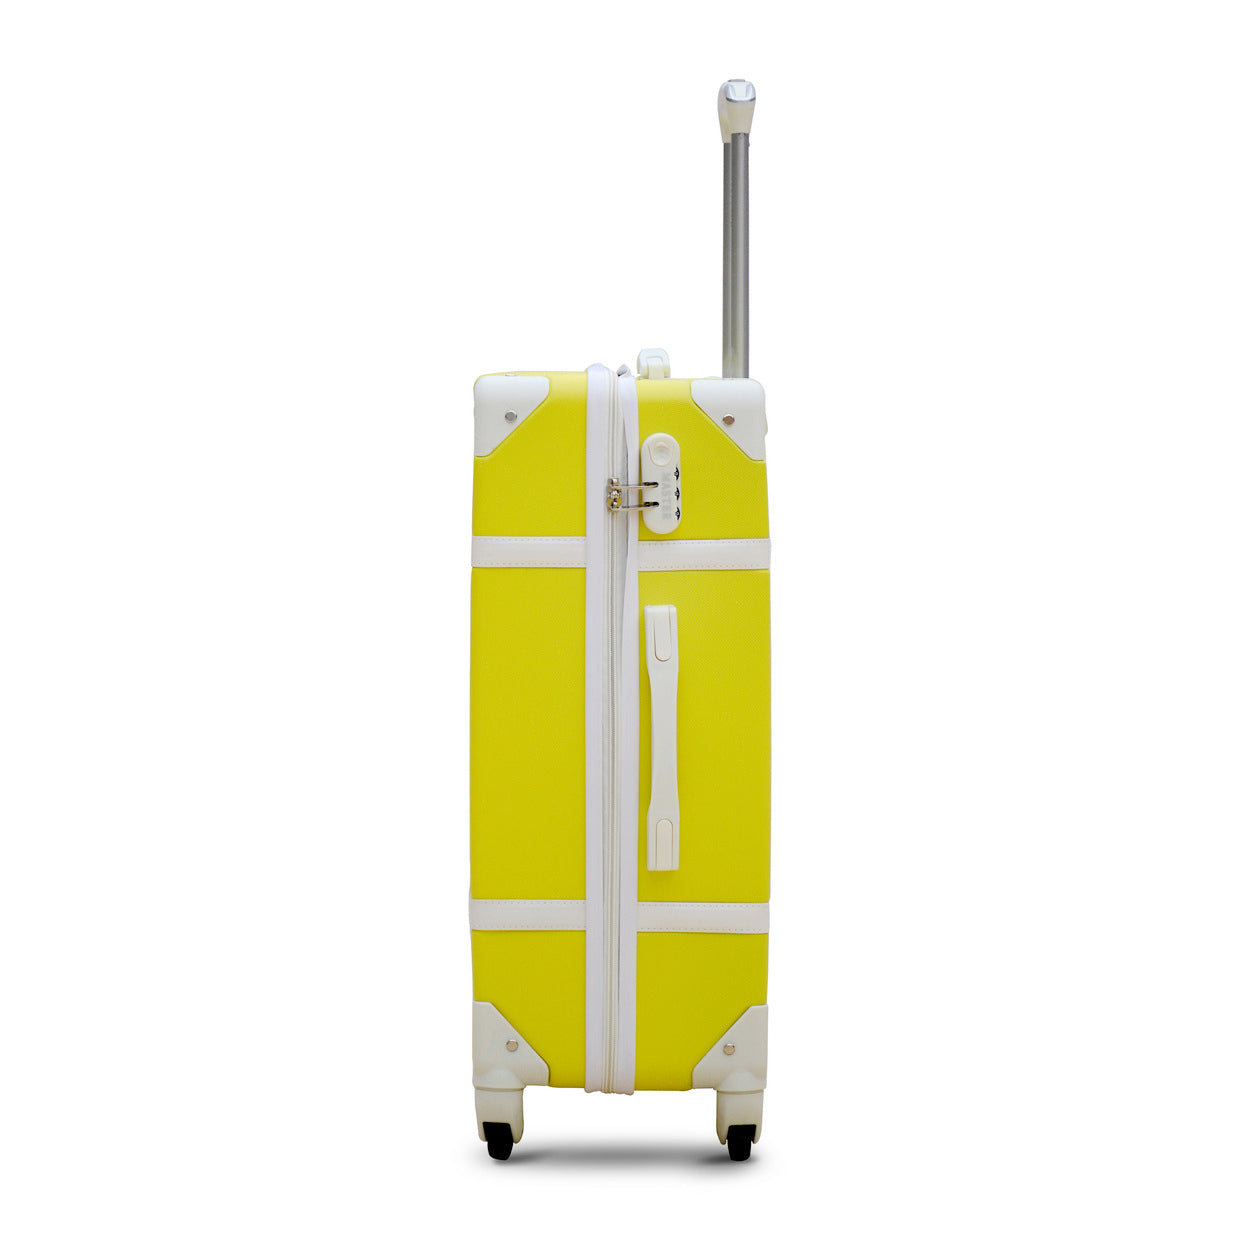 Lightweight ABS 20 Kg Luggage + Beauty Case | Hard Case Trolley Bag | Corner Guard Yellow